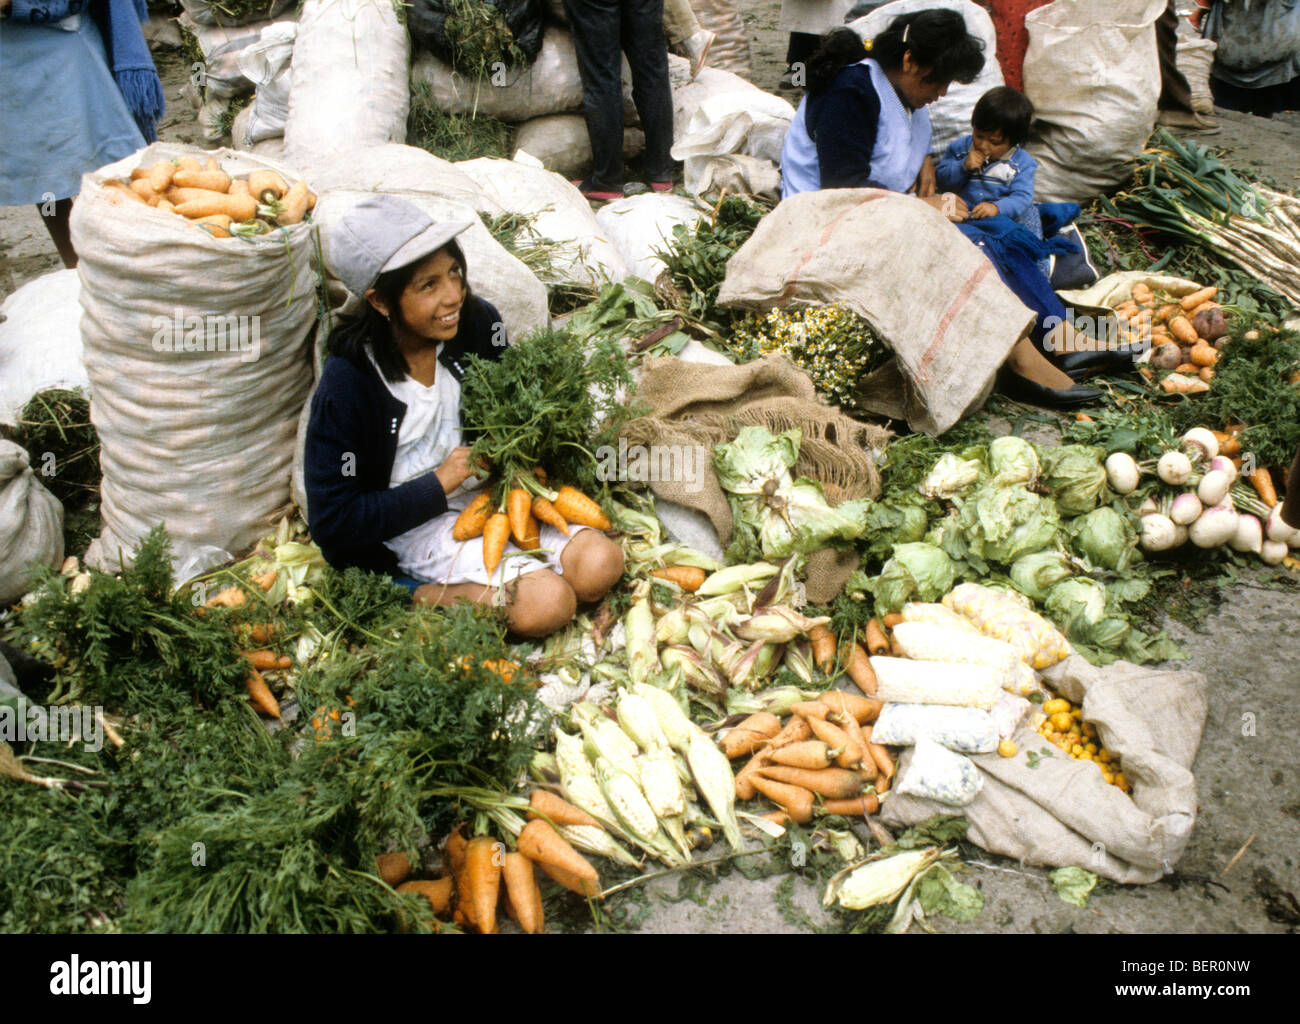 Young girl selling vegetables in local upland Ecuador market. Stock Photo